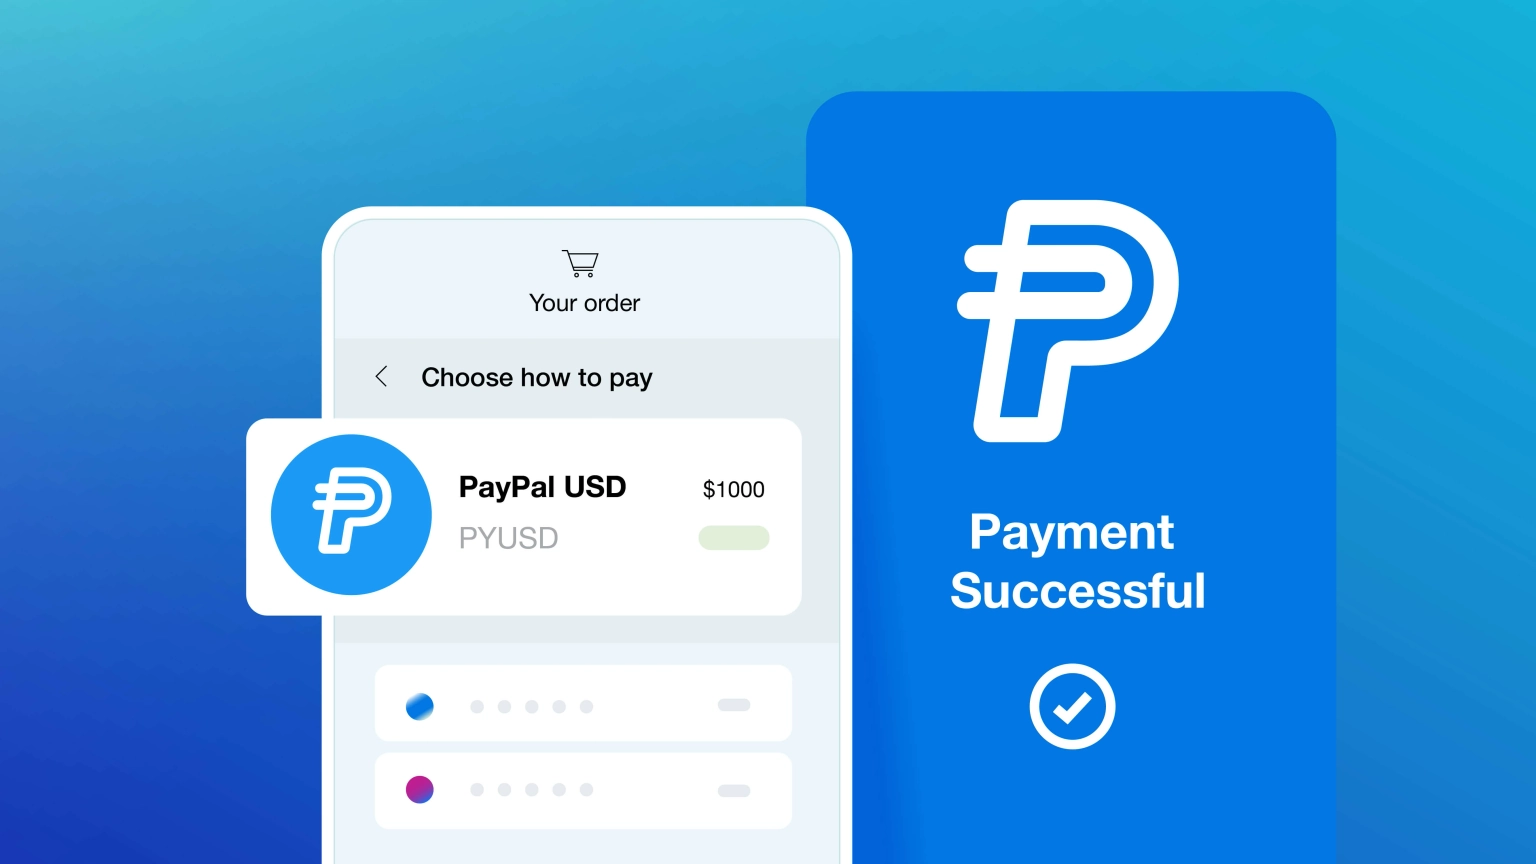 Using PayPal Stablecoin PYUSD for payments in online shopping